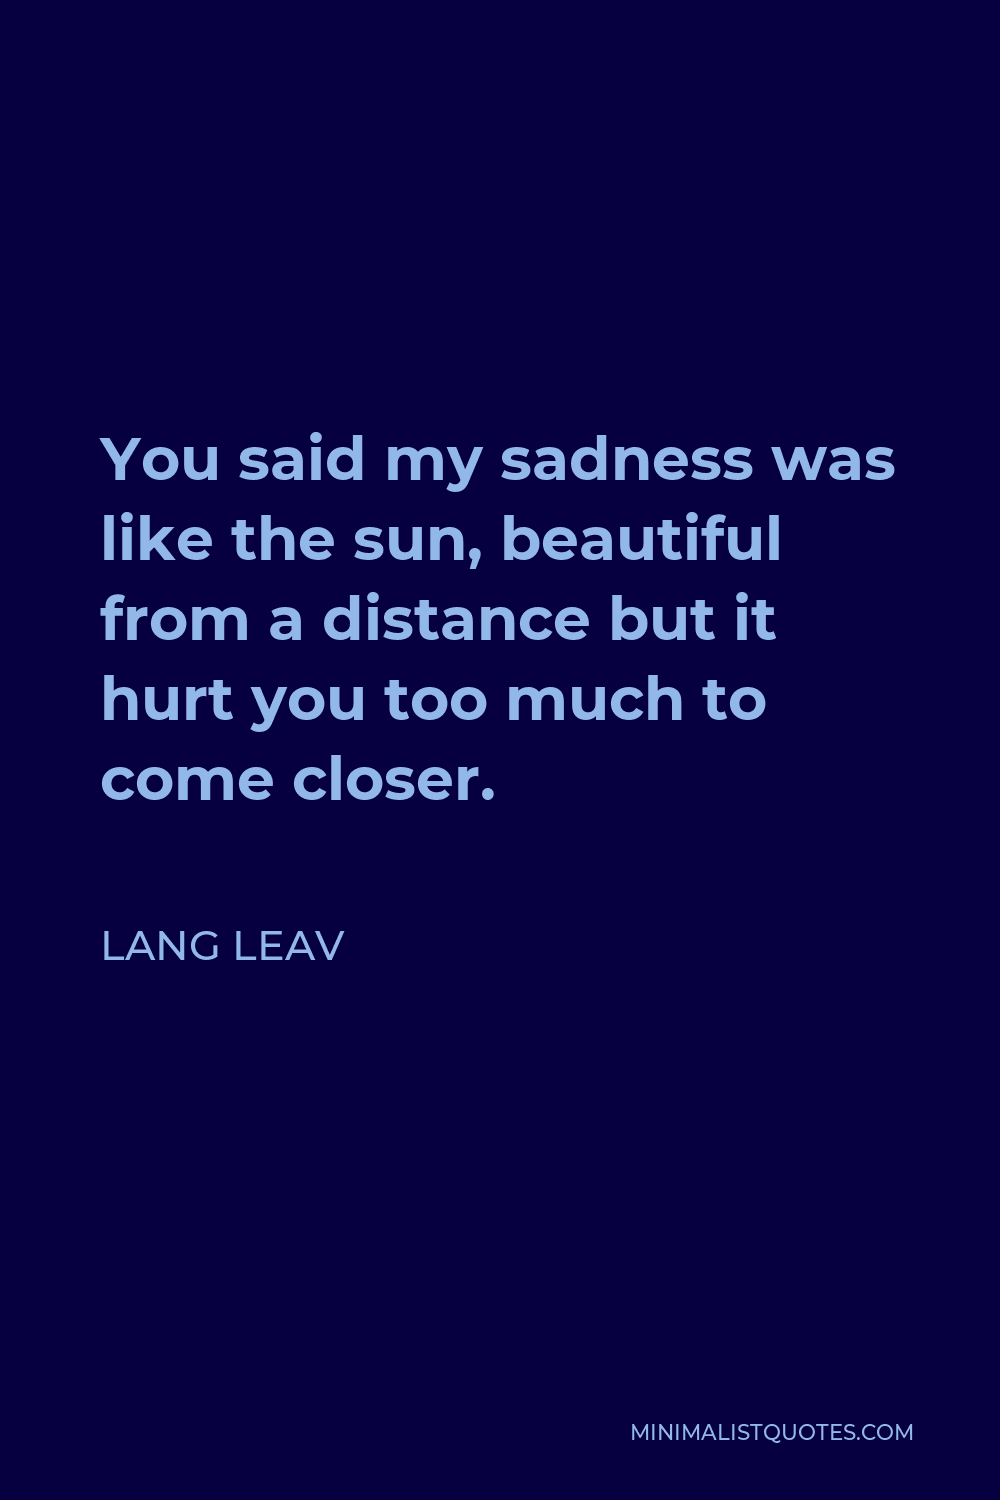 Lang Leav Quote - You said my sadness was like the sun, beautiful from a distance but it hurt you too much to come closer.